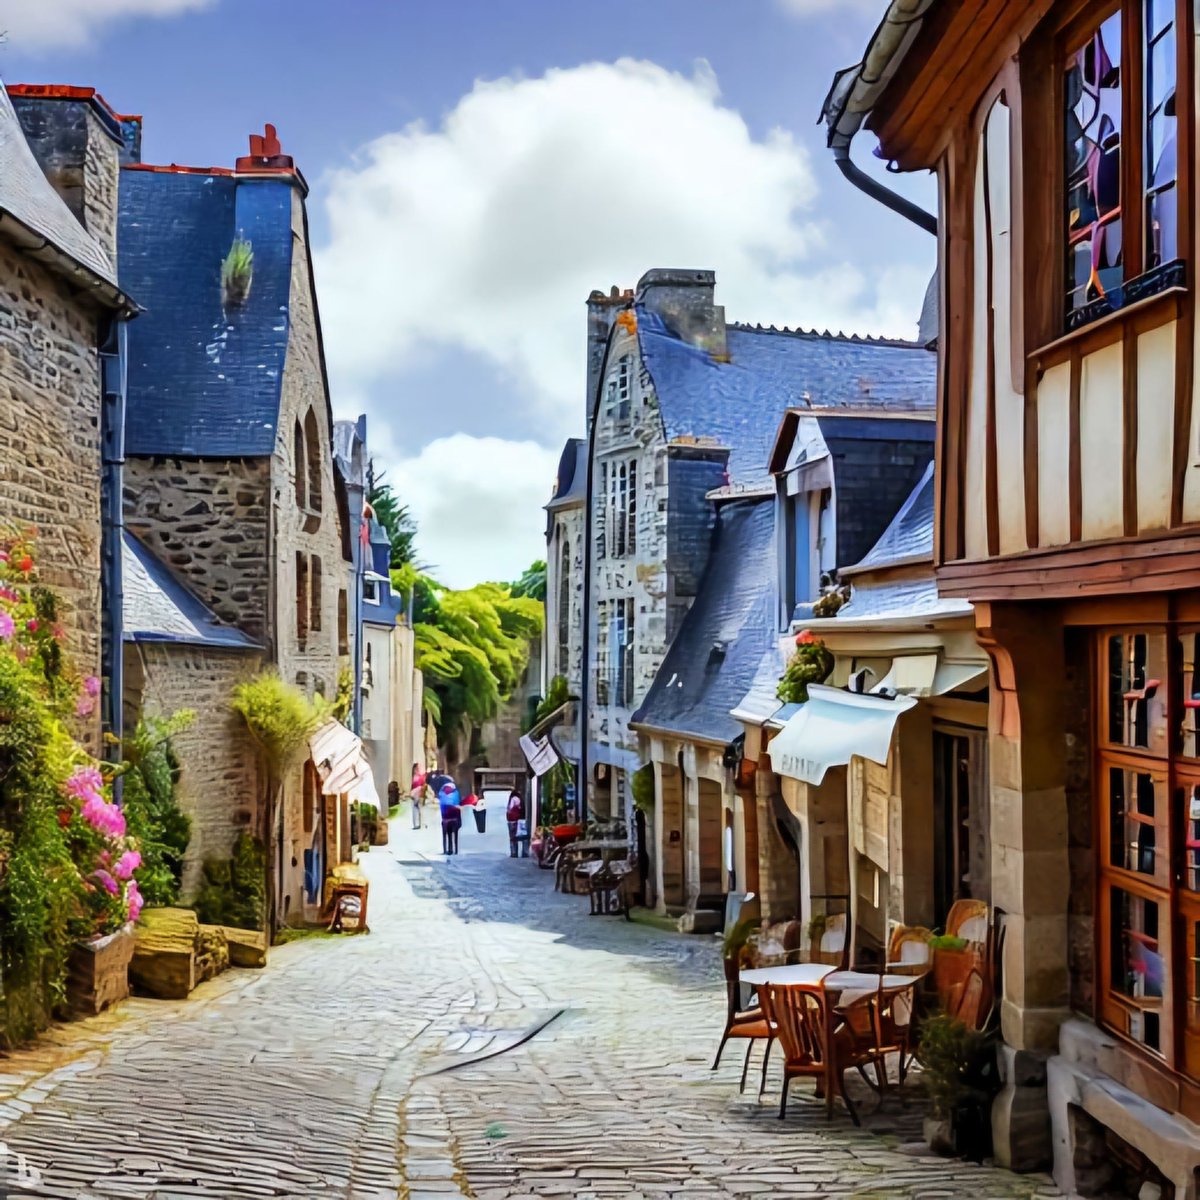 A street in the town of #Dinan 

#France 🇨🇵 #travel our #PhotoofTheDay buff.ly/3PWOftZ